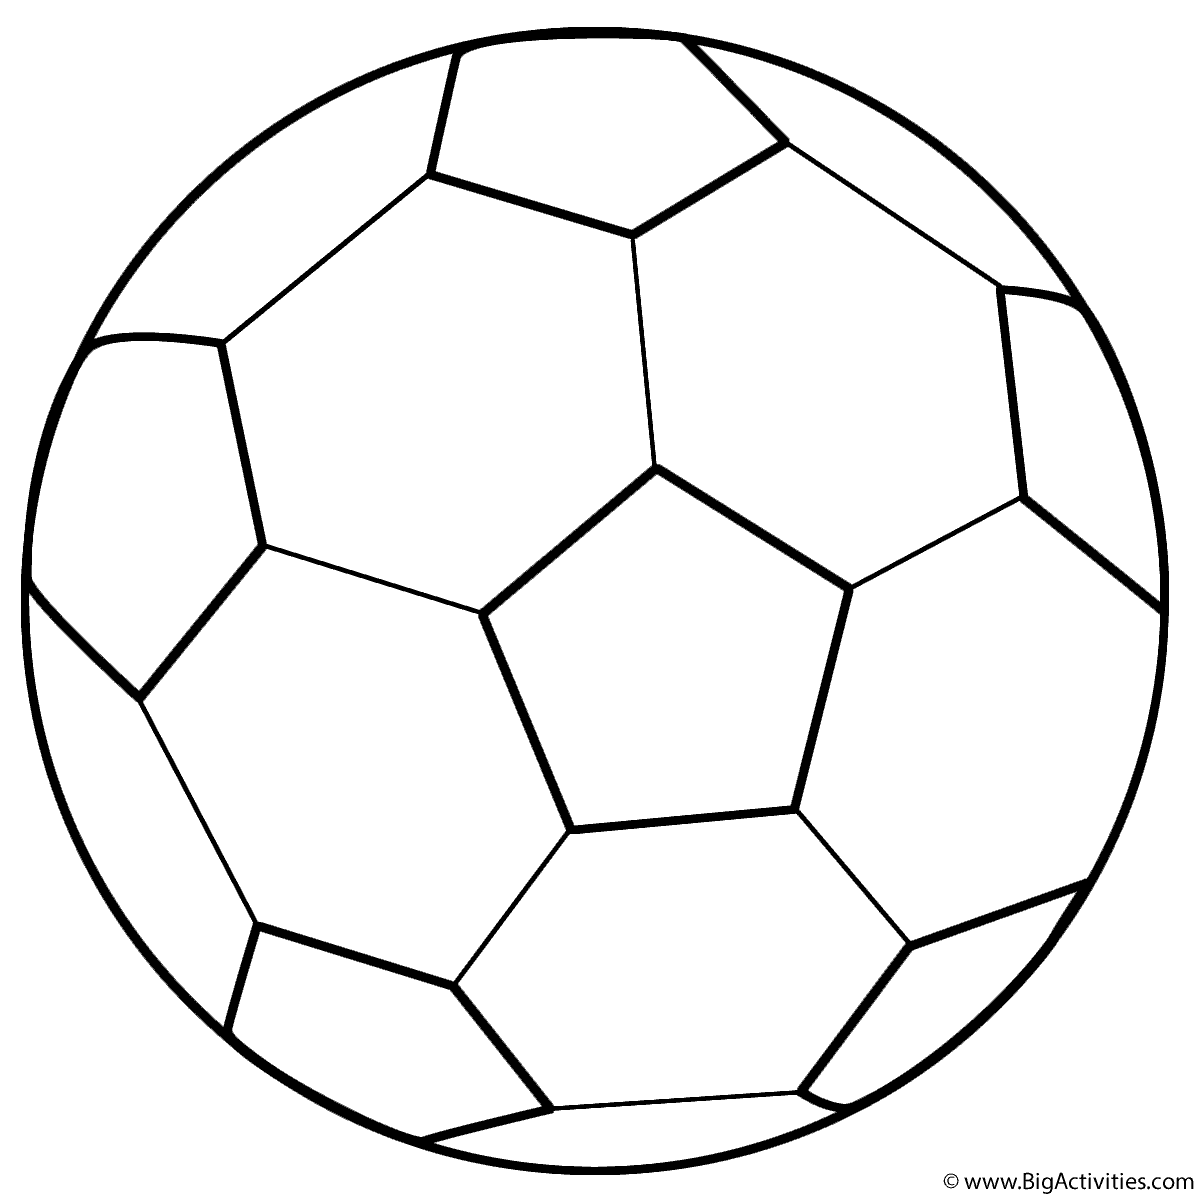 Soccer Ball - Coloring Page (Sports)